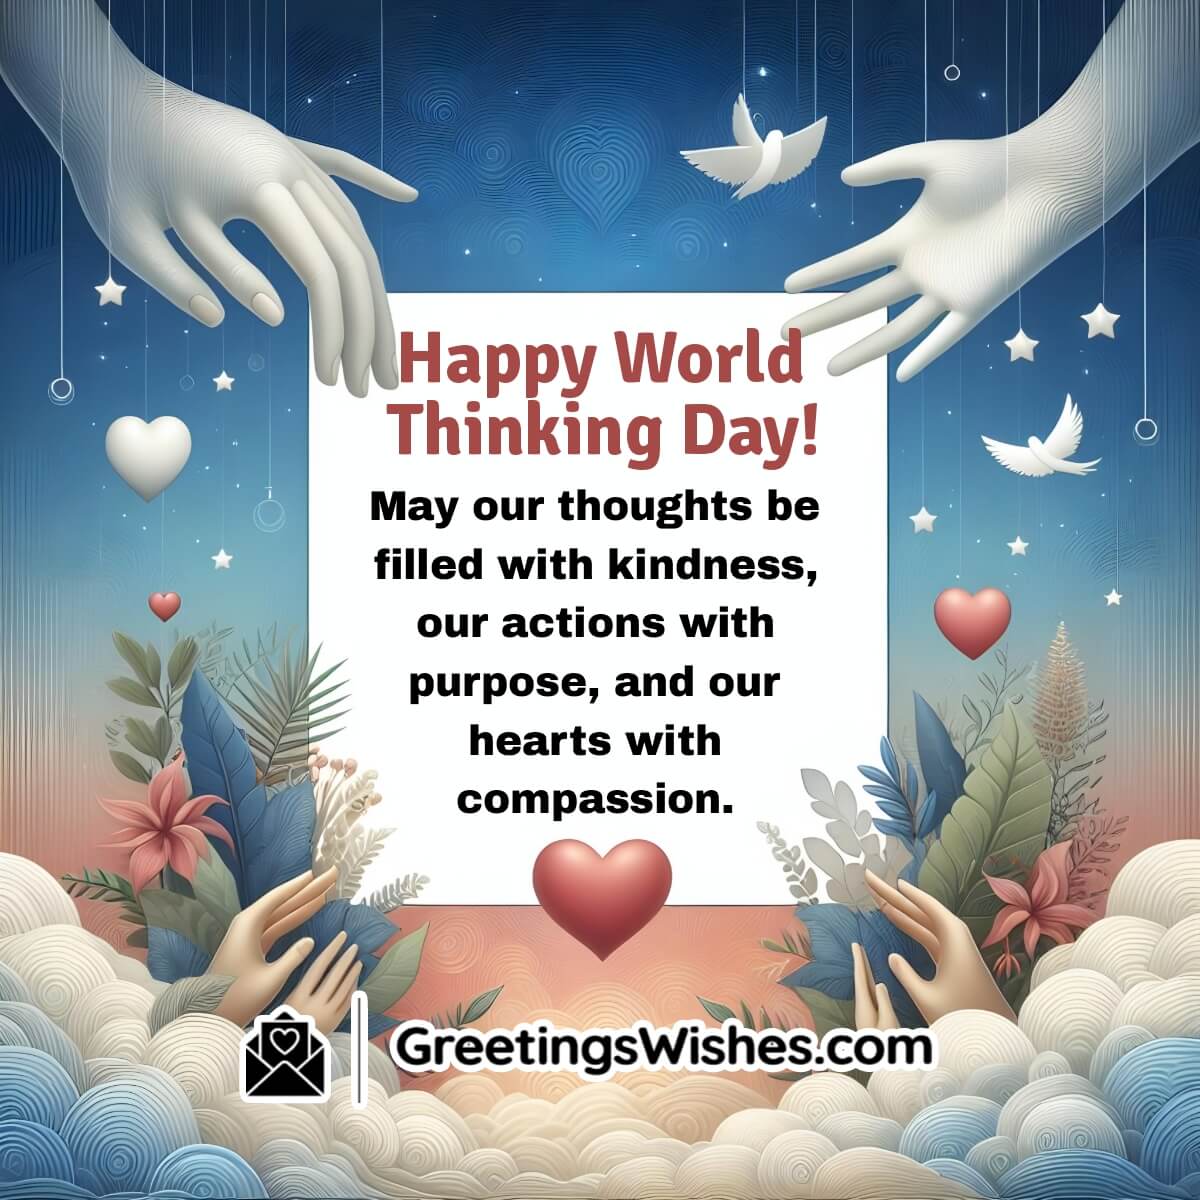 Happy World Thinking Day Messages